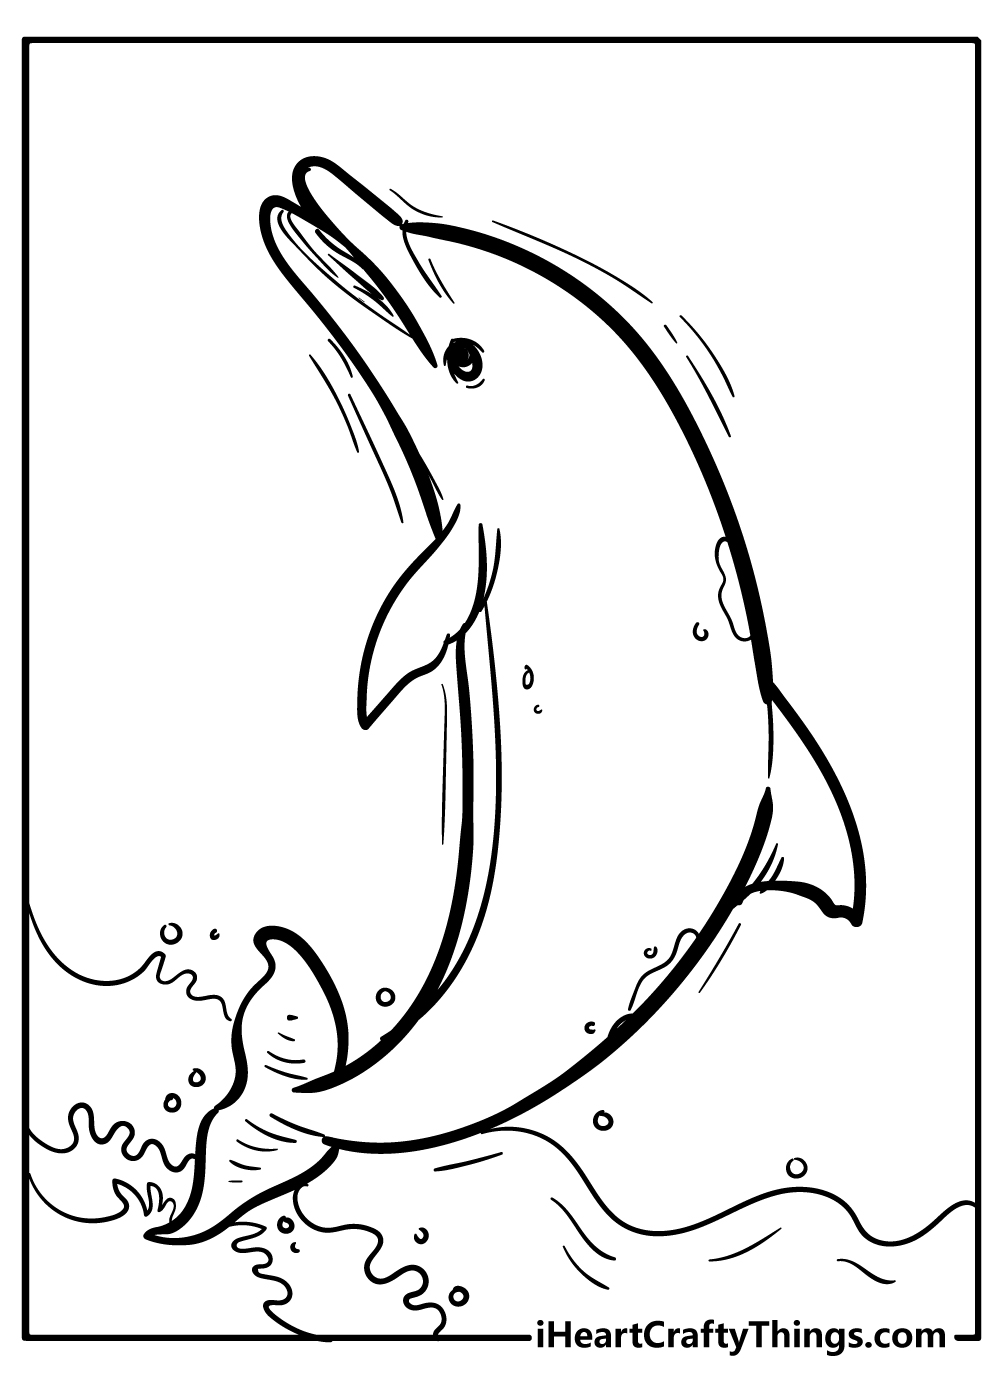 Dolphin Coloring Pages free printable